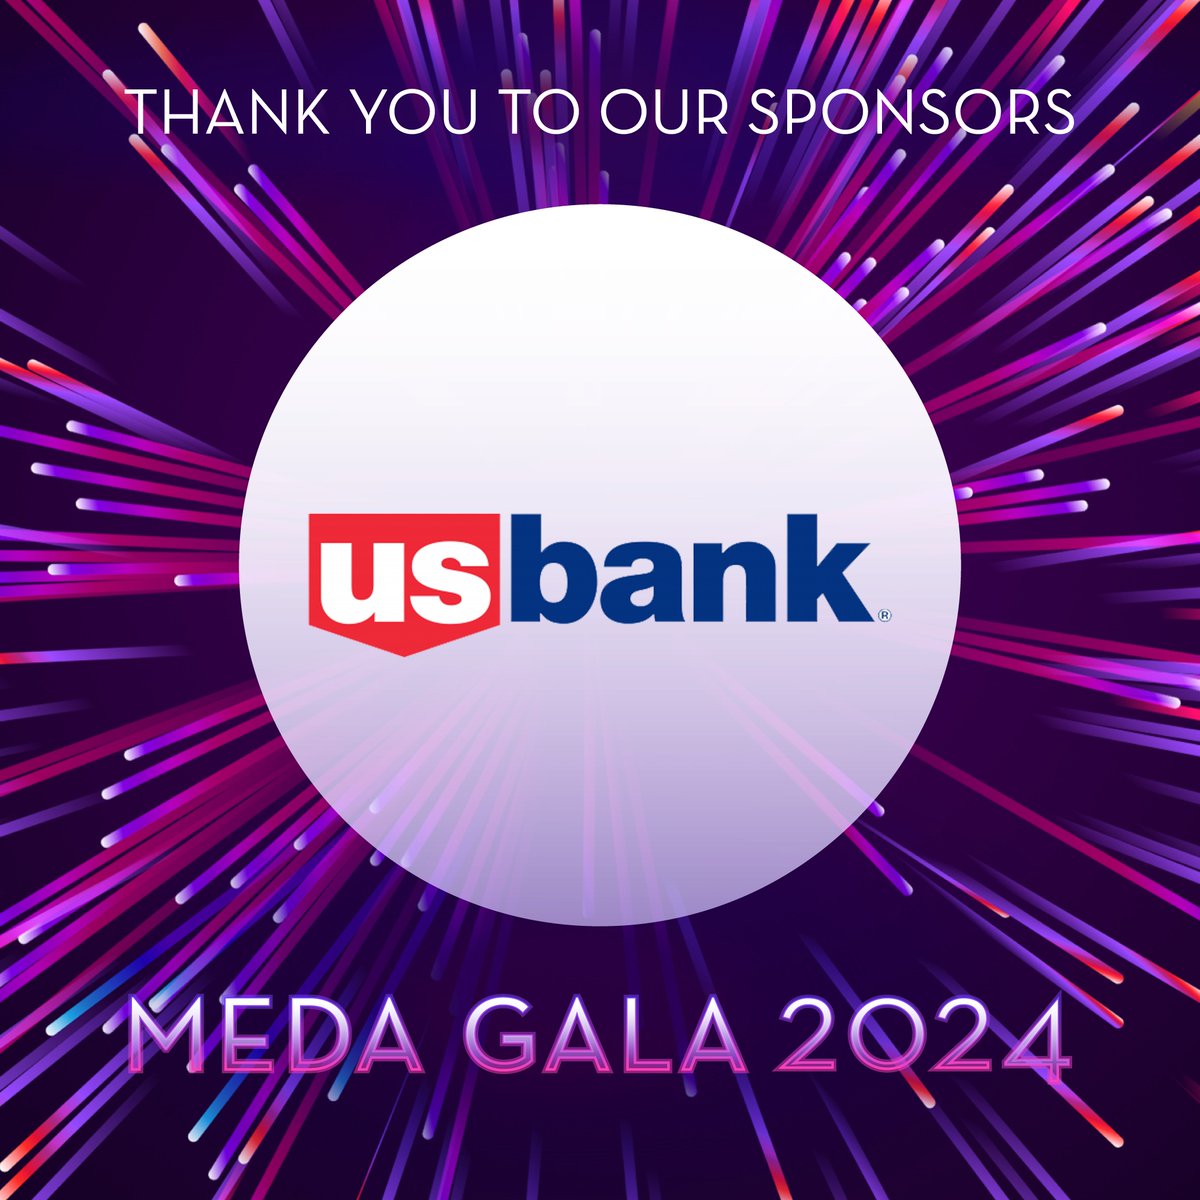 We are thrilled to announce that @usbank is a sponsor of the MEDA Gala. Their support will help us celebrate the incredible achievements of our clients & partners, & raise funds for our programs & services. We are deeply grateful for their generosity & commitment to our mission.